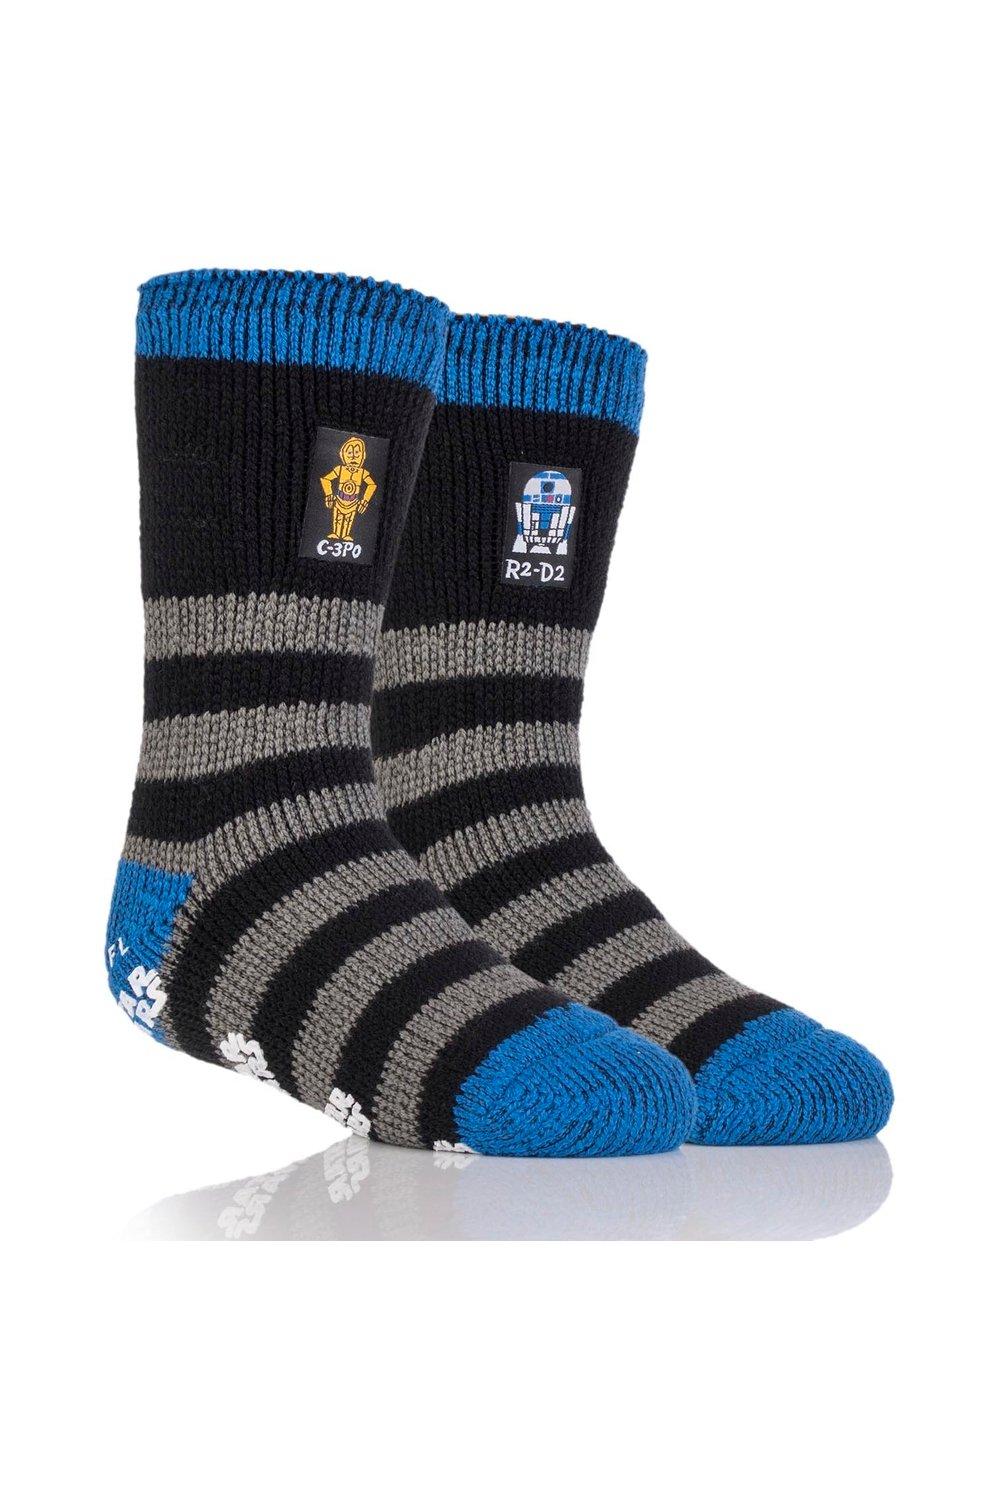 1 Pair Star Wars C-3PO and R2-D2 Slipper Socks with Grip